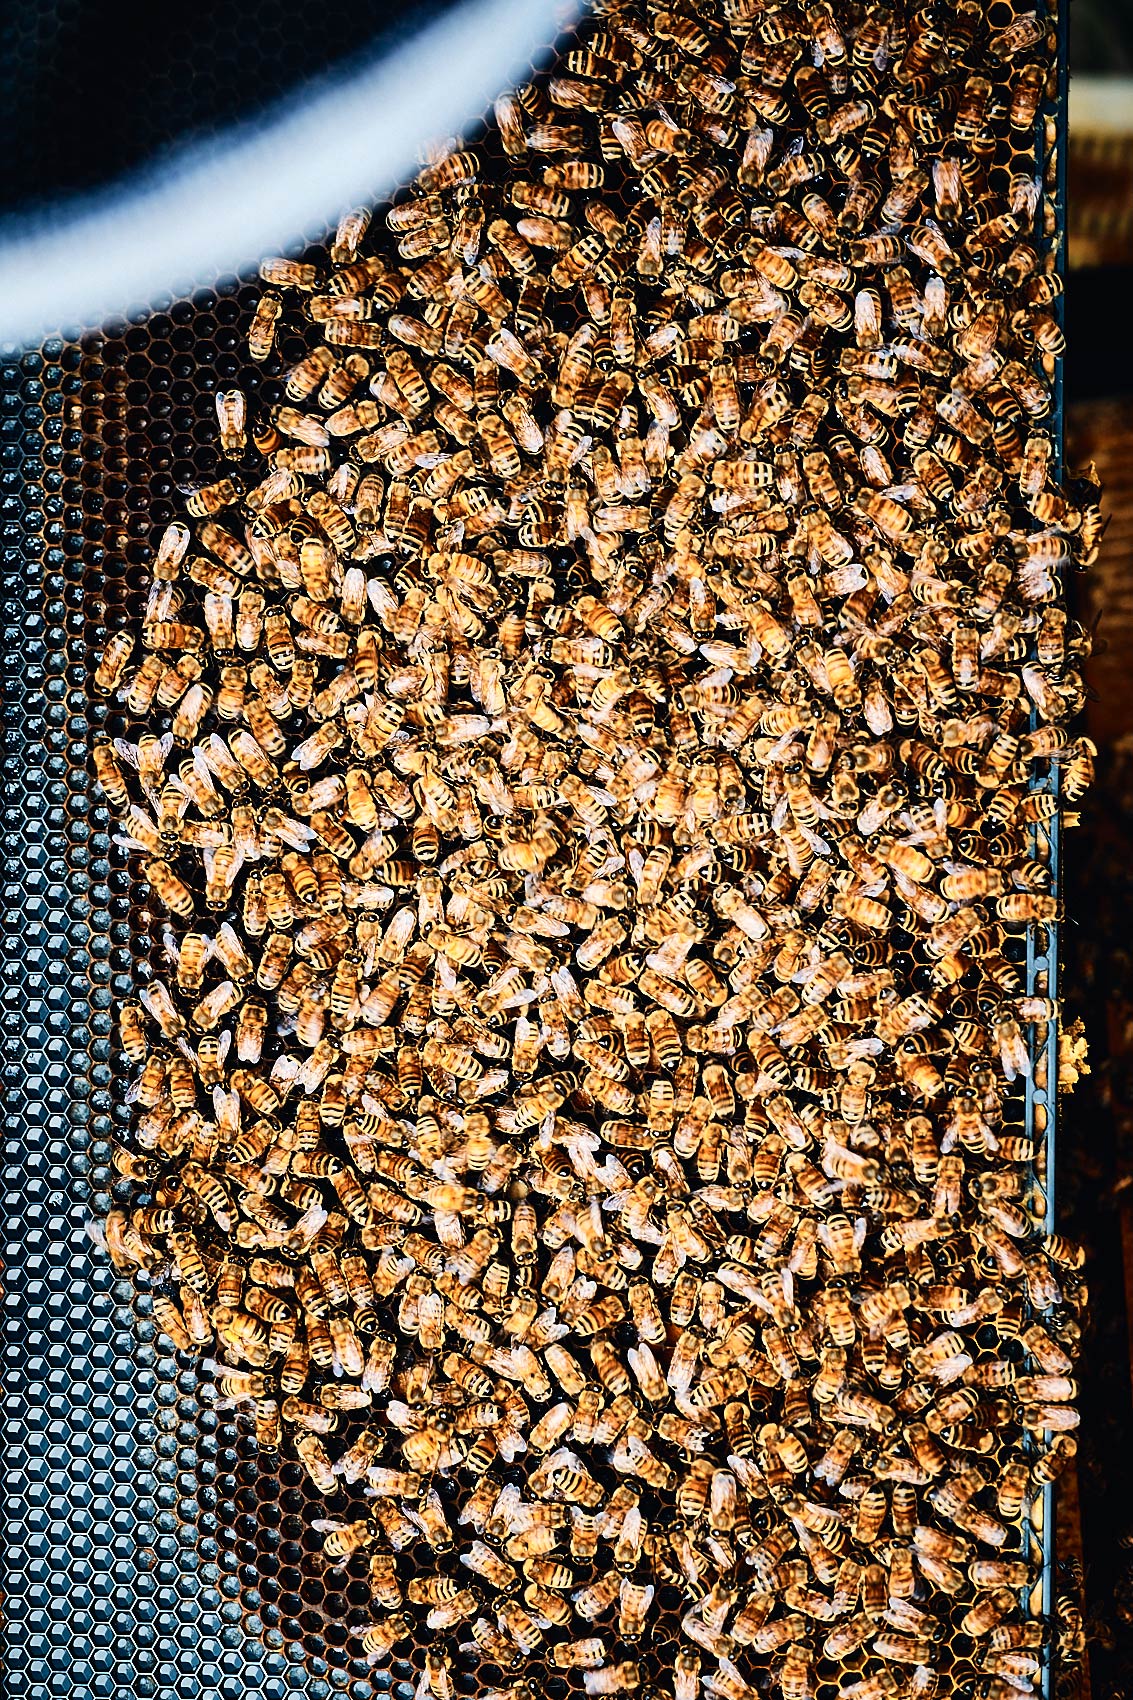 Our Beehive • New Zealand Honeybees Gathering in Hive • Lifestyle & Documentary Food Photography